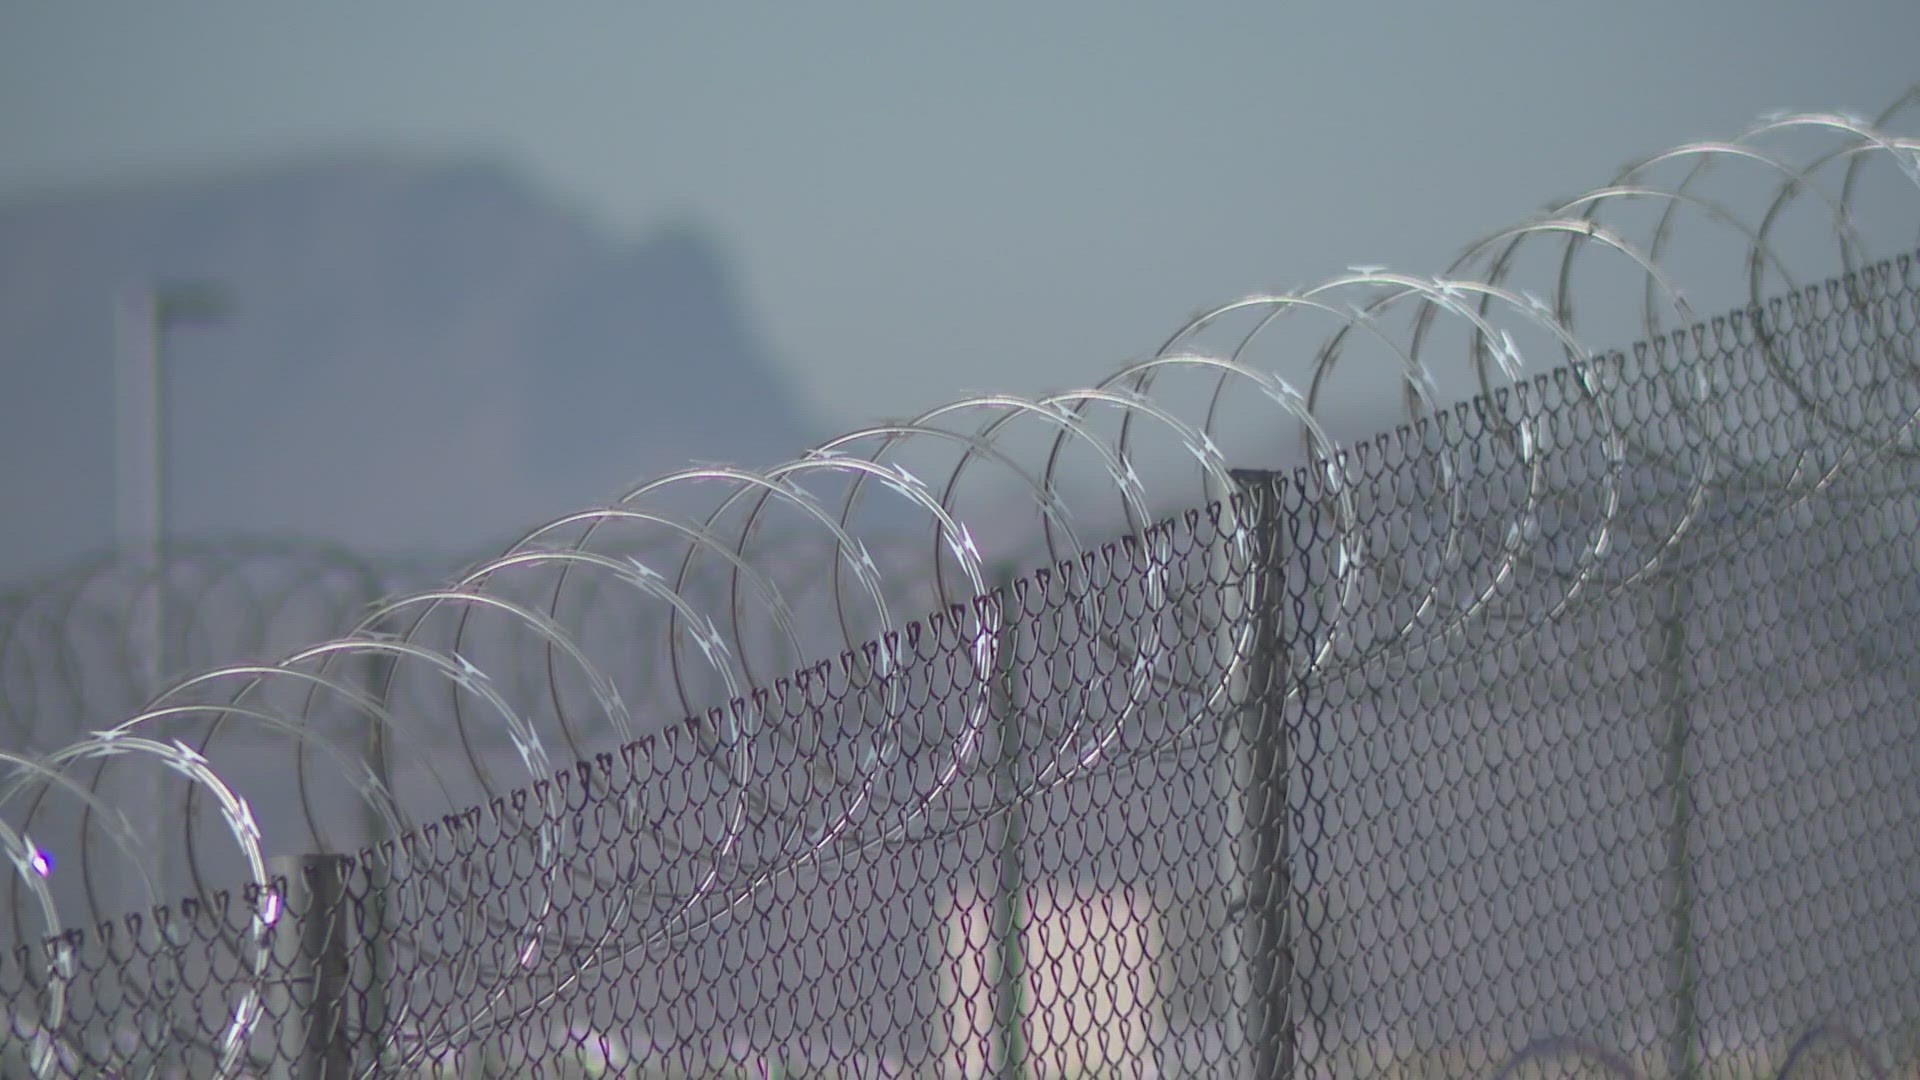 12News I-Team looked into reports of extreme heat in prison cells over the summer of 2023 after dozens of people contacted 12News for help. Here's what they found.